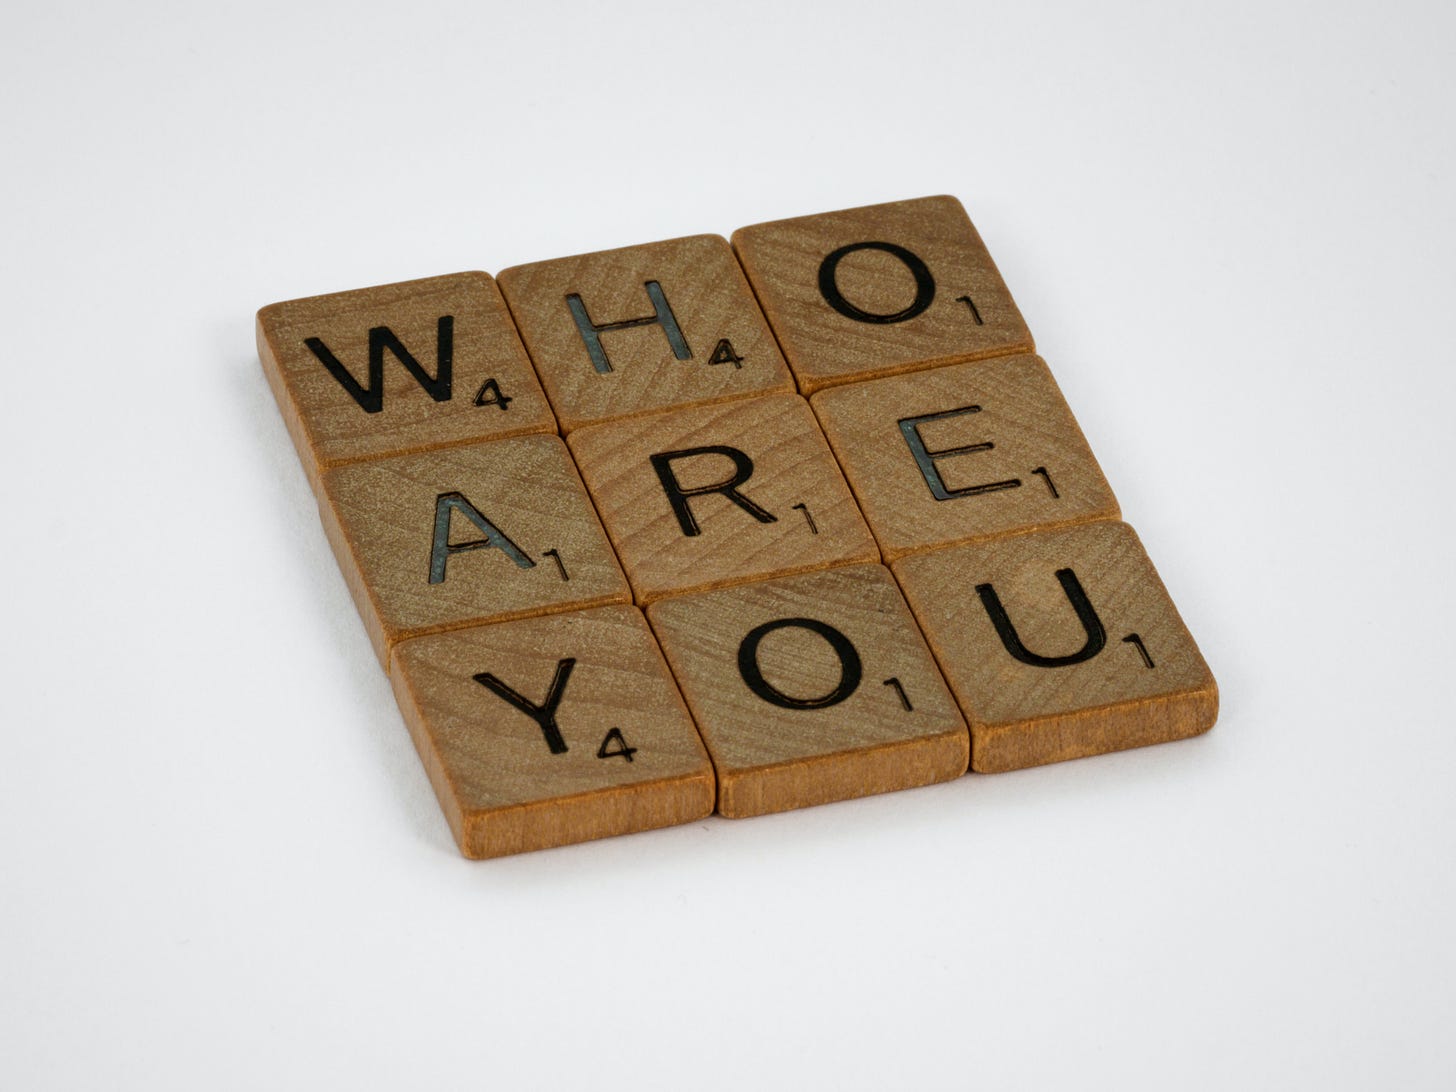 Wooden scrabble pieces on a neutral background, that spells out, "Who are you"